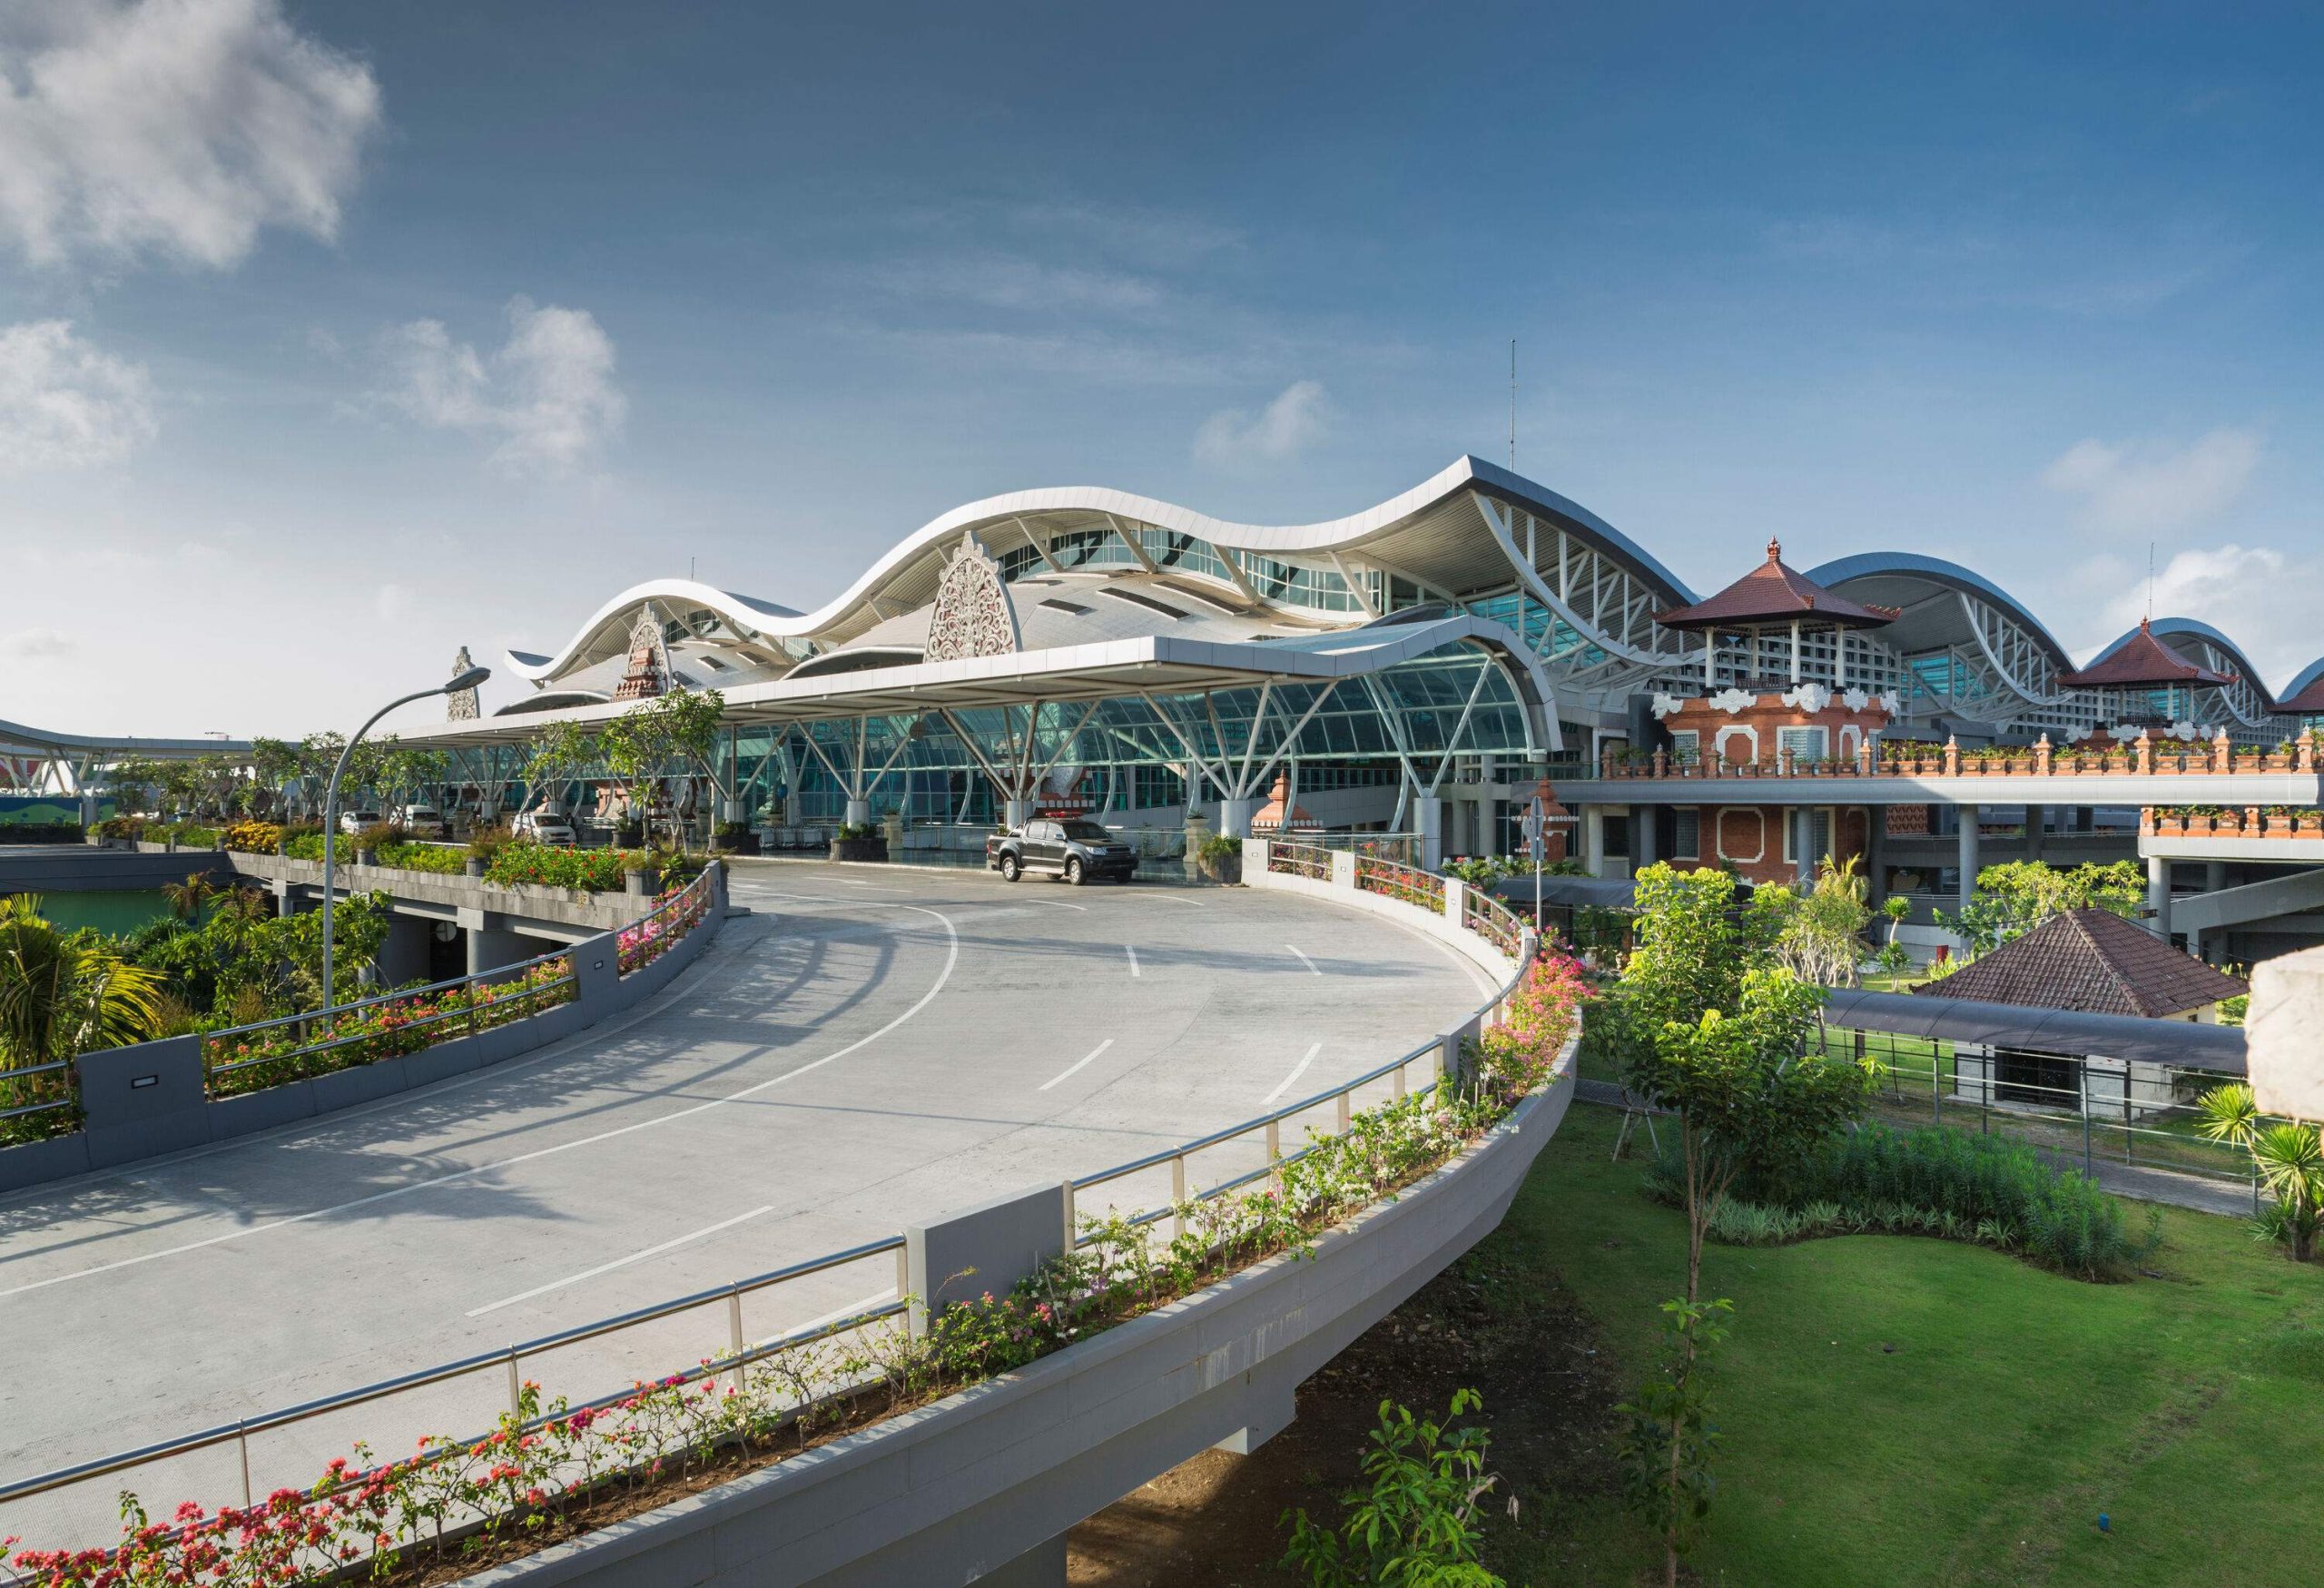 A modern airport façade with wide domes roof design and traditional pavilions along one side.